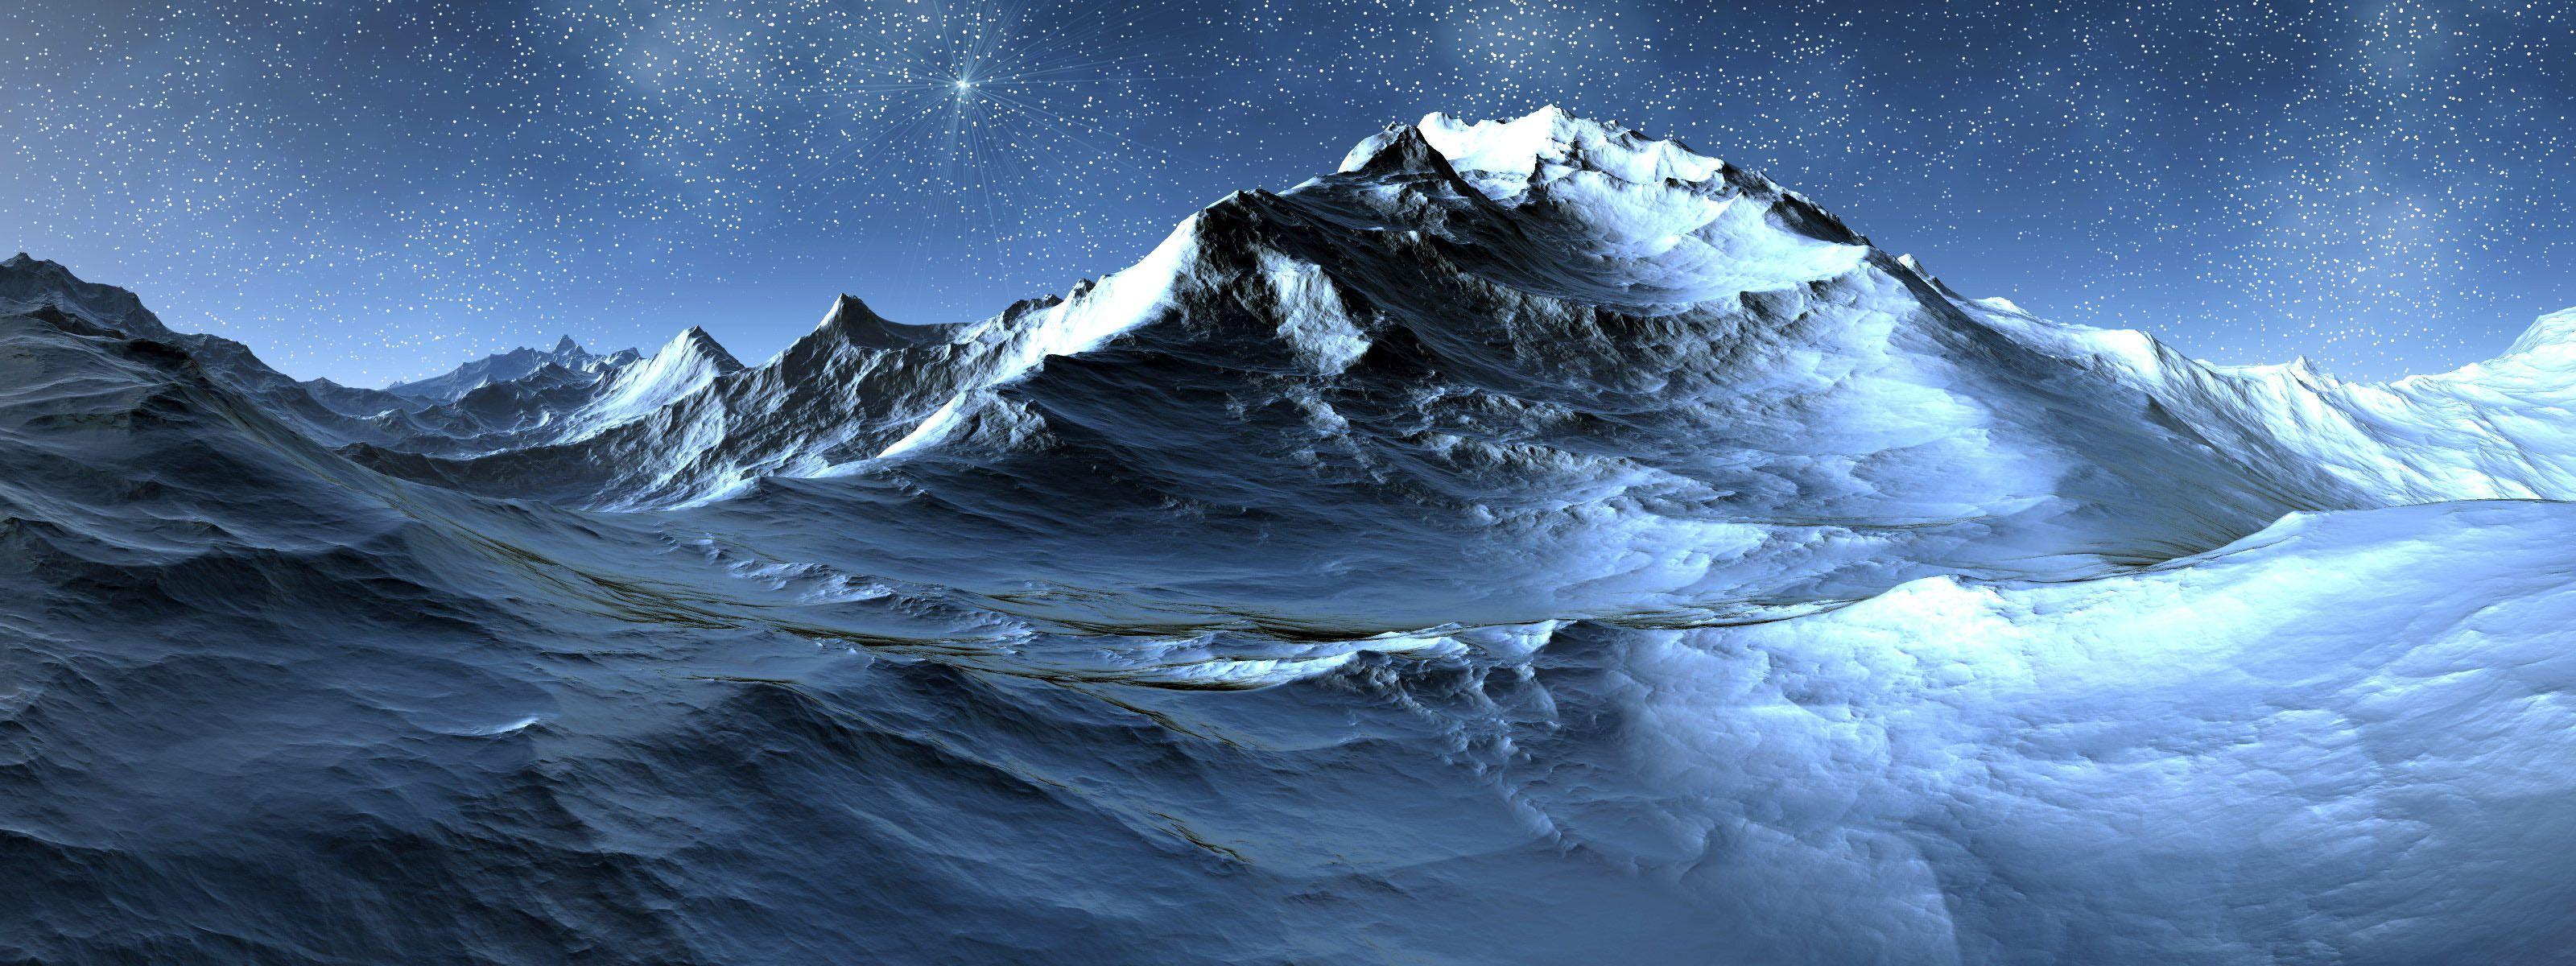 Ice Mountain. Nature Landscapes. Dual screen wallpaper